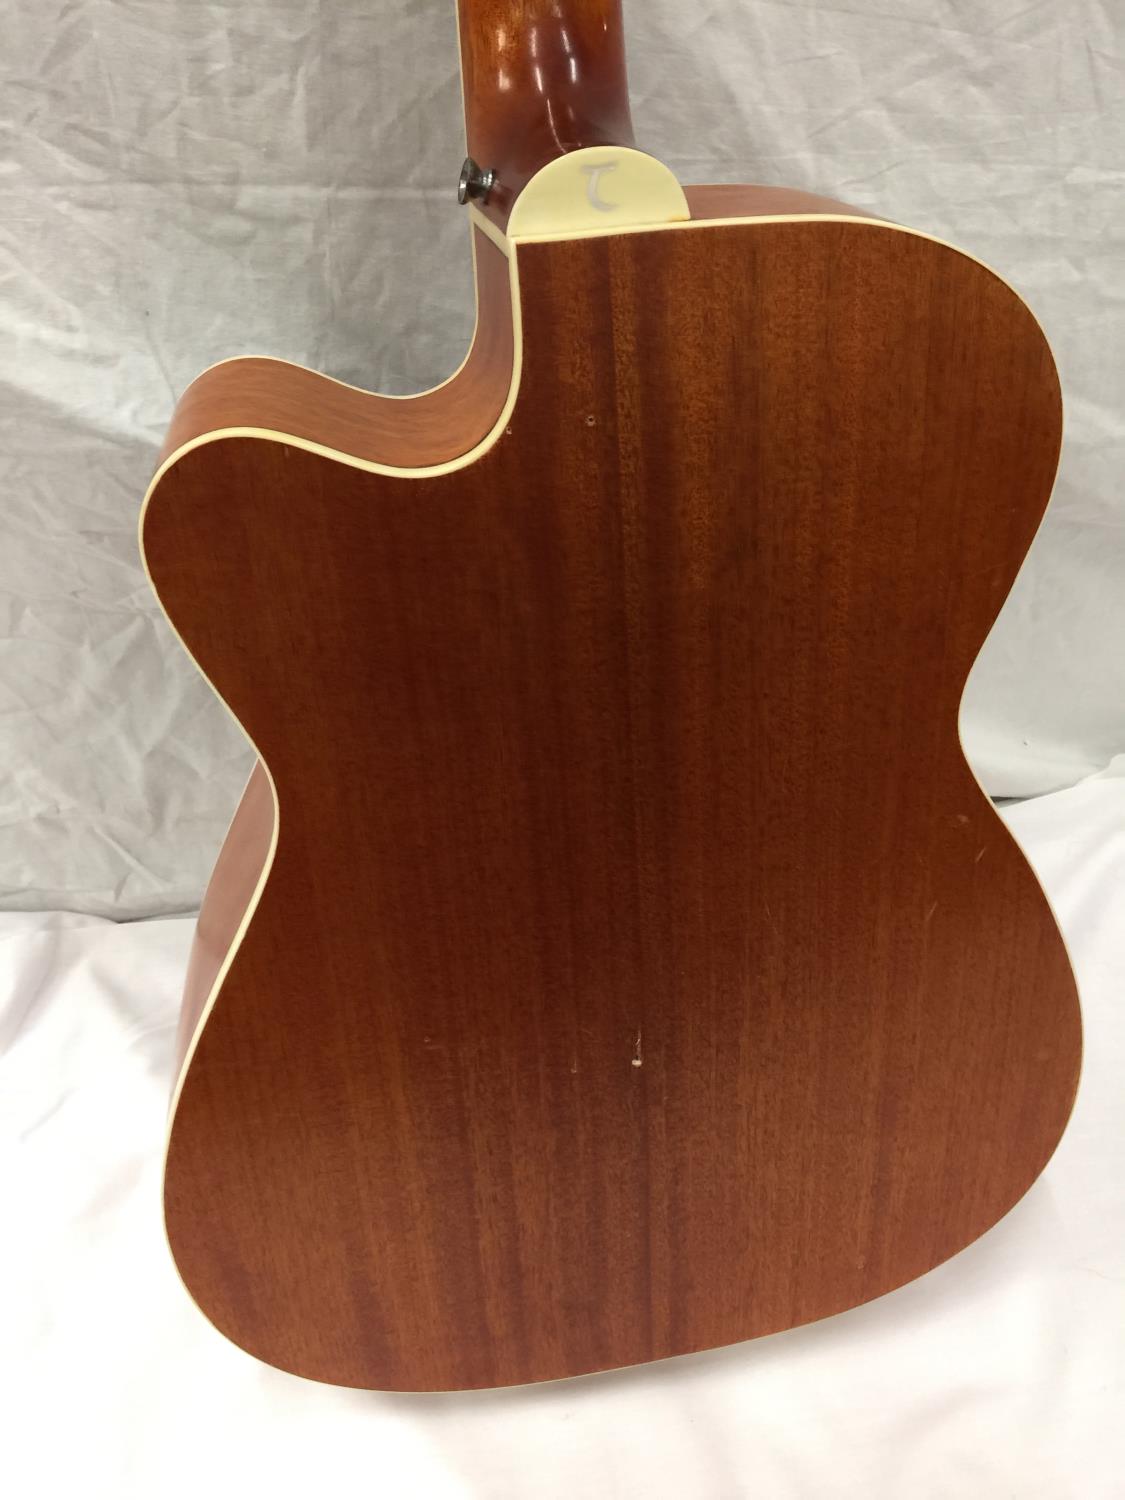 A TANGLEWOOD NASHVILLE SEMI ACOUSTIC GUITAR - Image 12 of 15